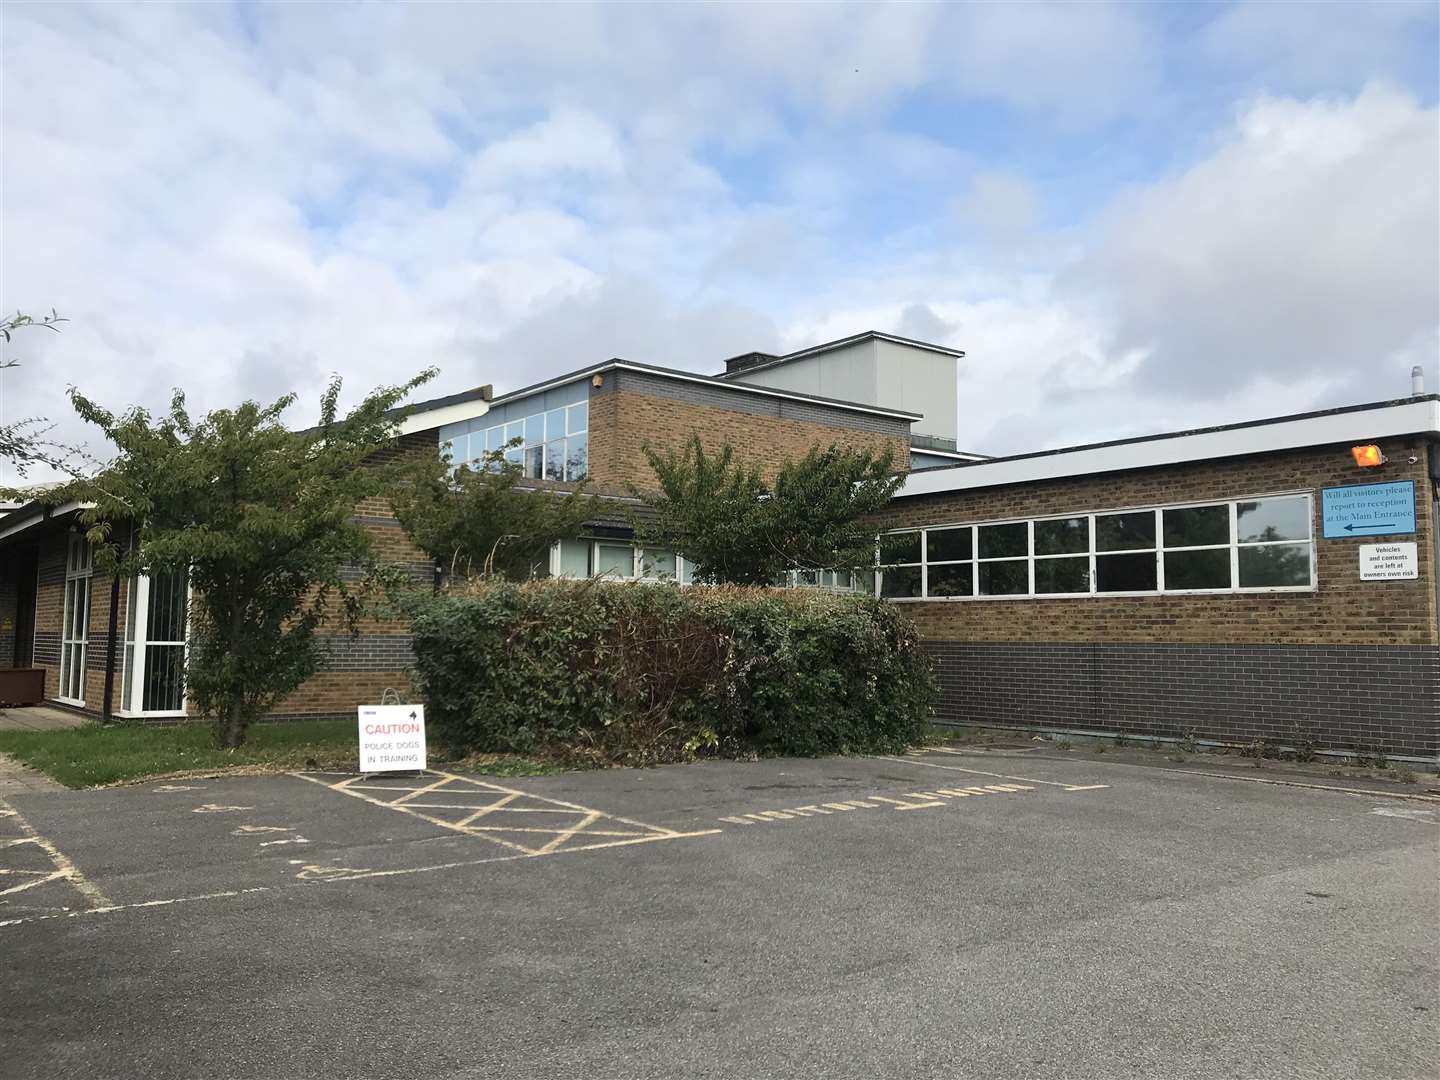 A pupil referral unit will open on the site of former secondary school, Walmer Science College (3863243)